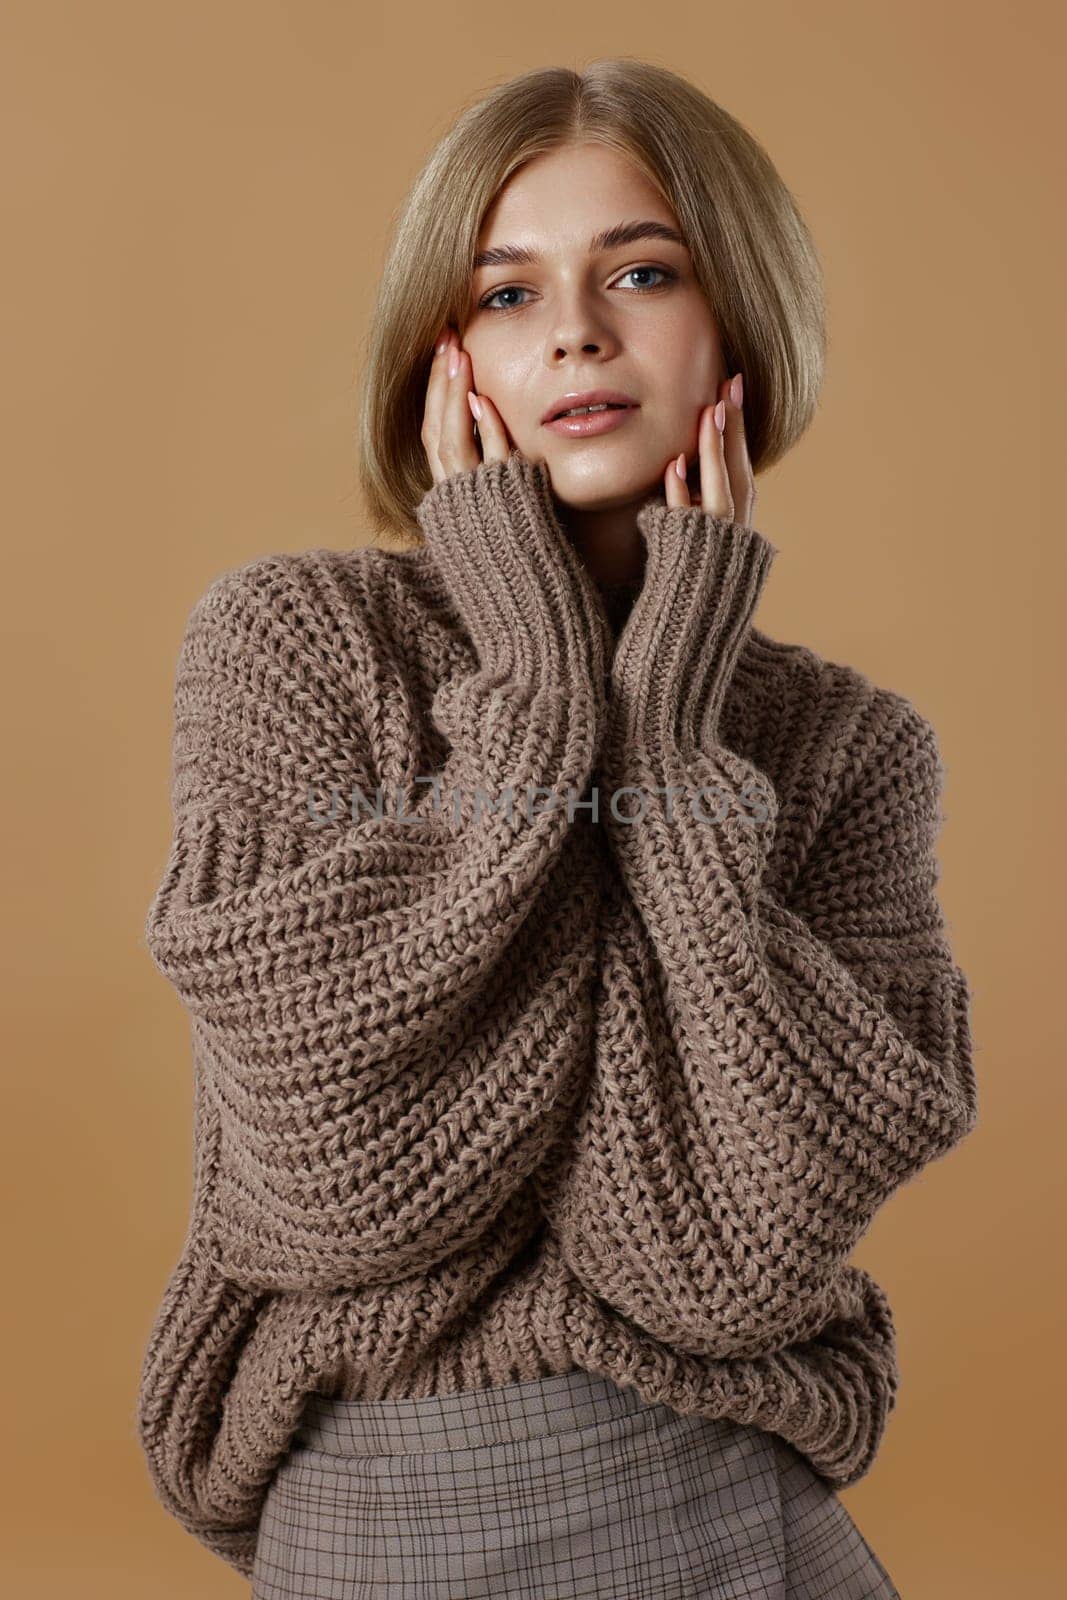 beautiful blonde woman in brown knitted sweater by erstudio